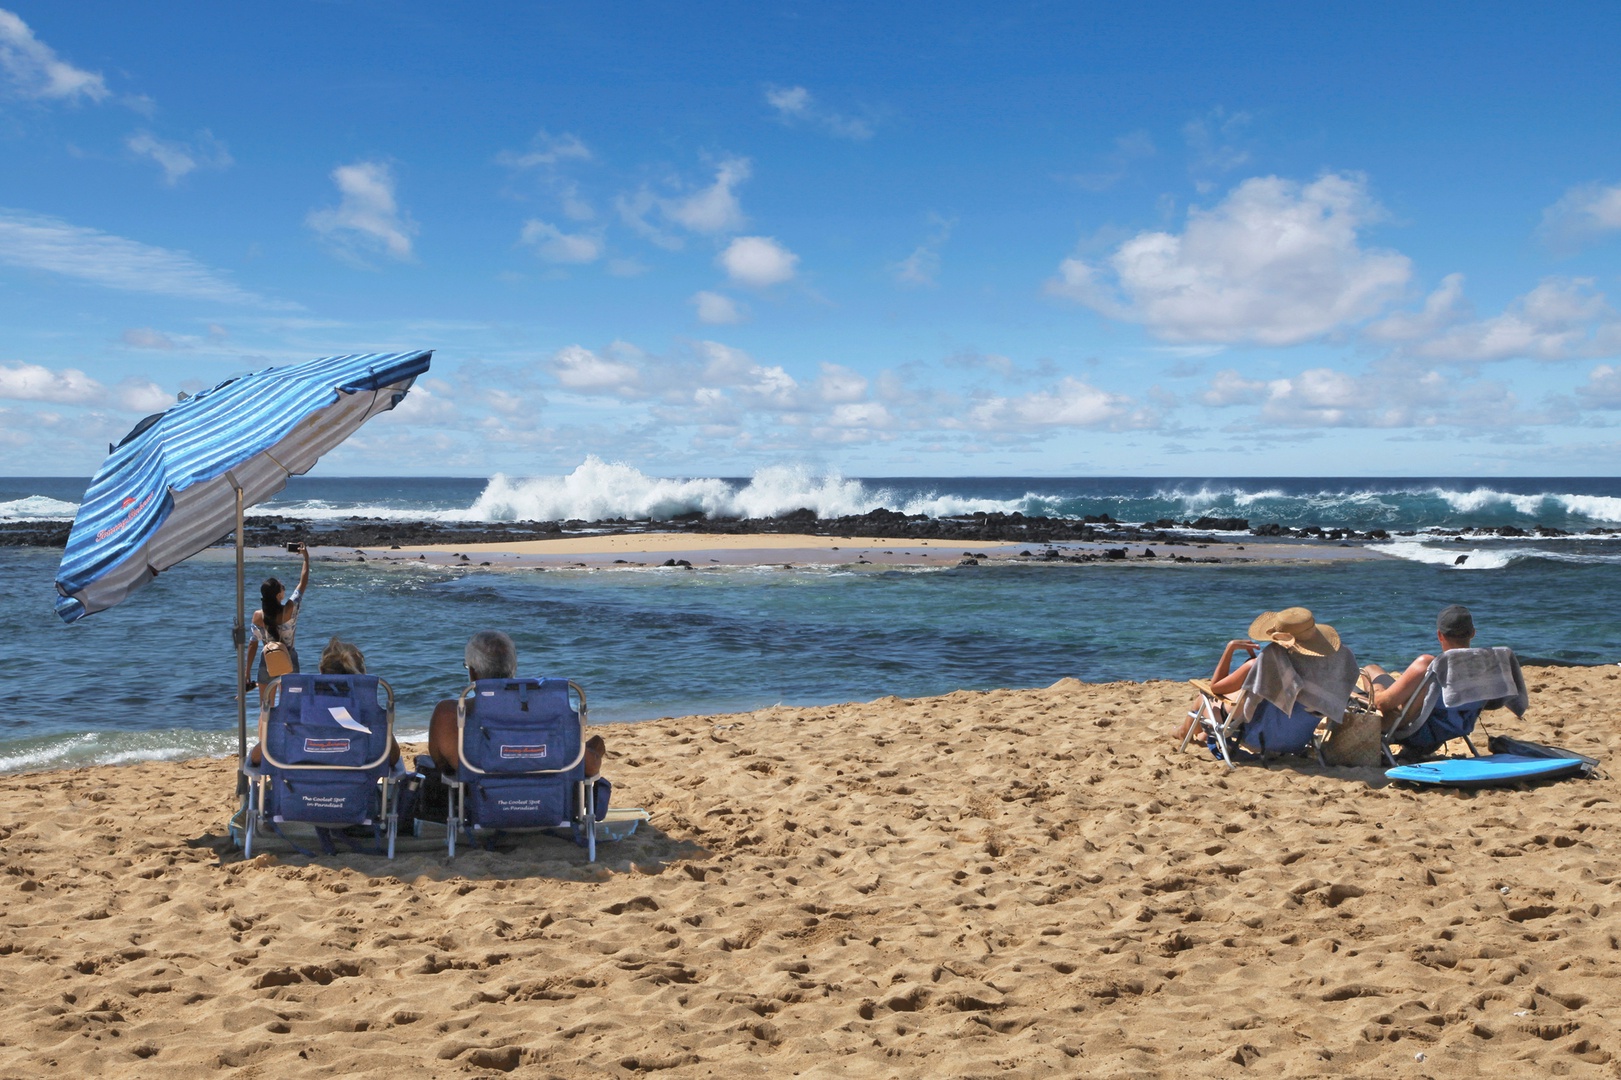 Koloa Vacation Rentals, Hale Pakika at Kukui'ula - Poipu beach is a local favorite to soak up the sun and check out the waves.